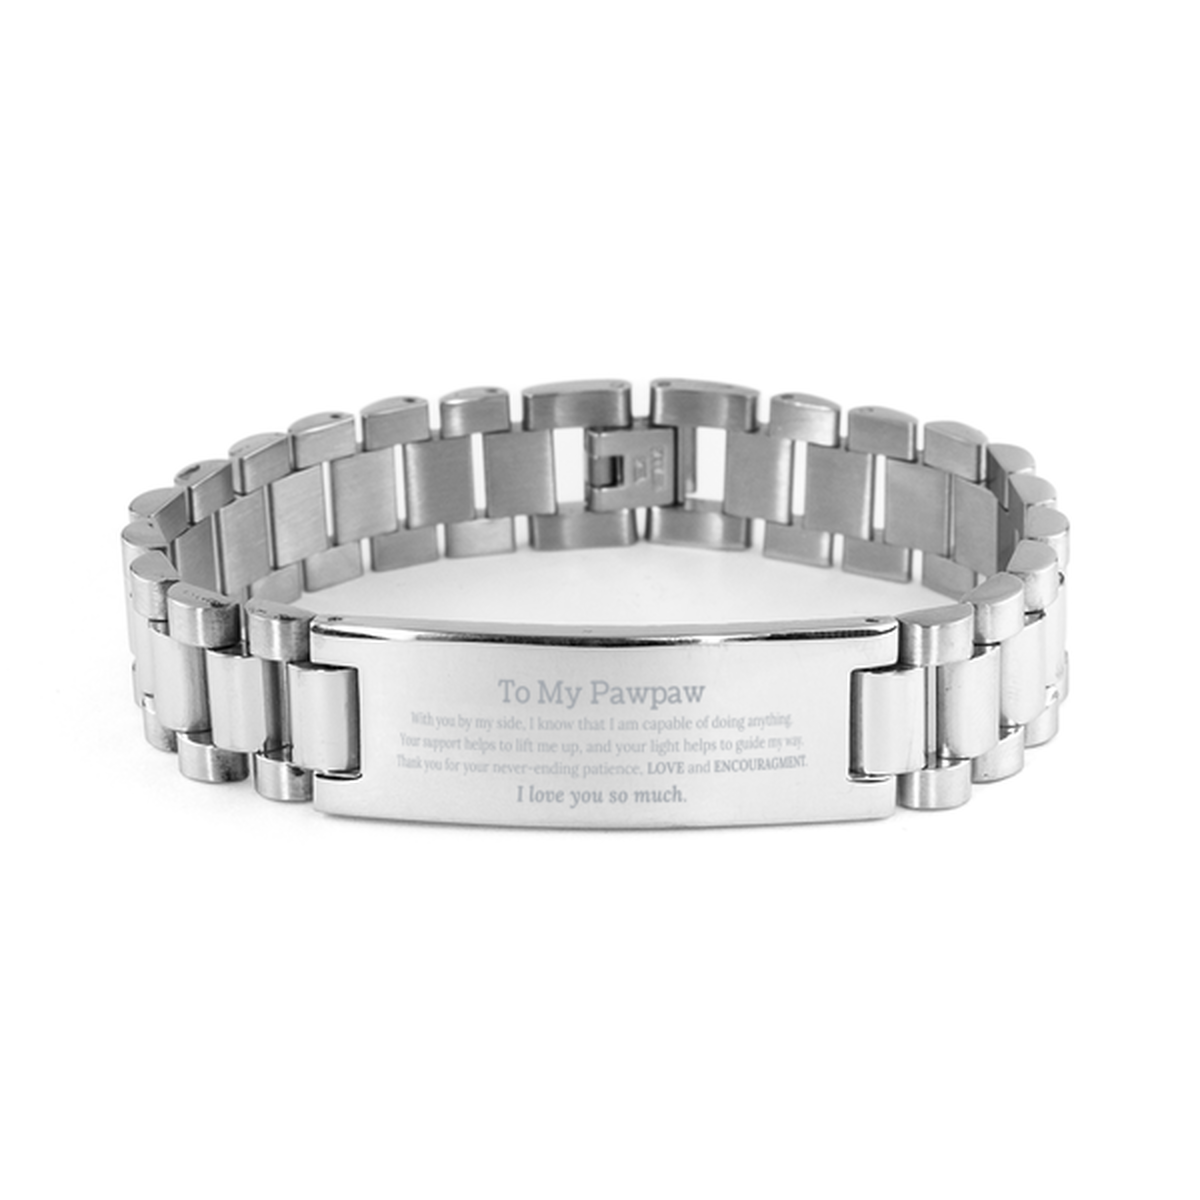 Appreciation Pawpaw Ladder Stainless Steel Bracelet Gifts, To My Pawpaw Birthday Christmas Wedding Keepsake Gifts for Pawpaw With you by my side, I know that I am capable of doing anything. I love you so much